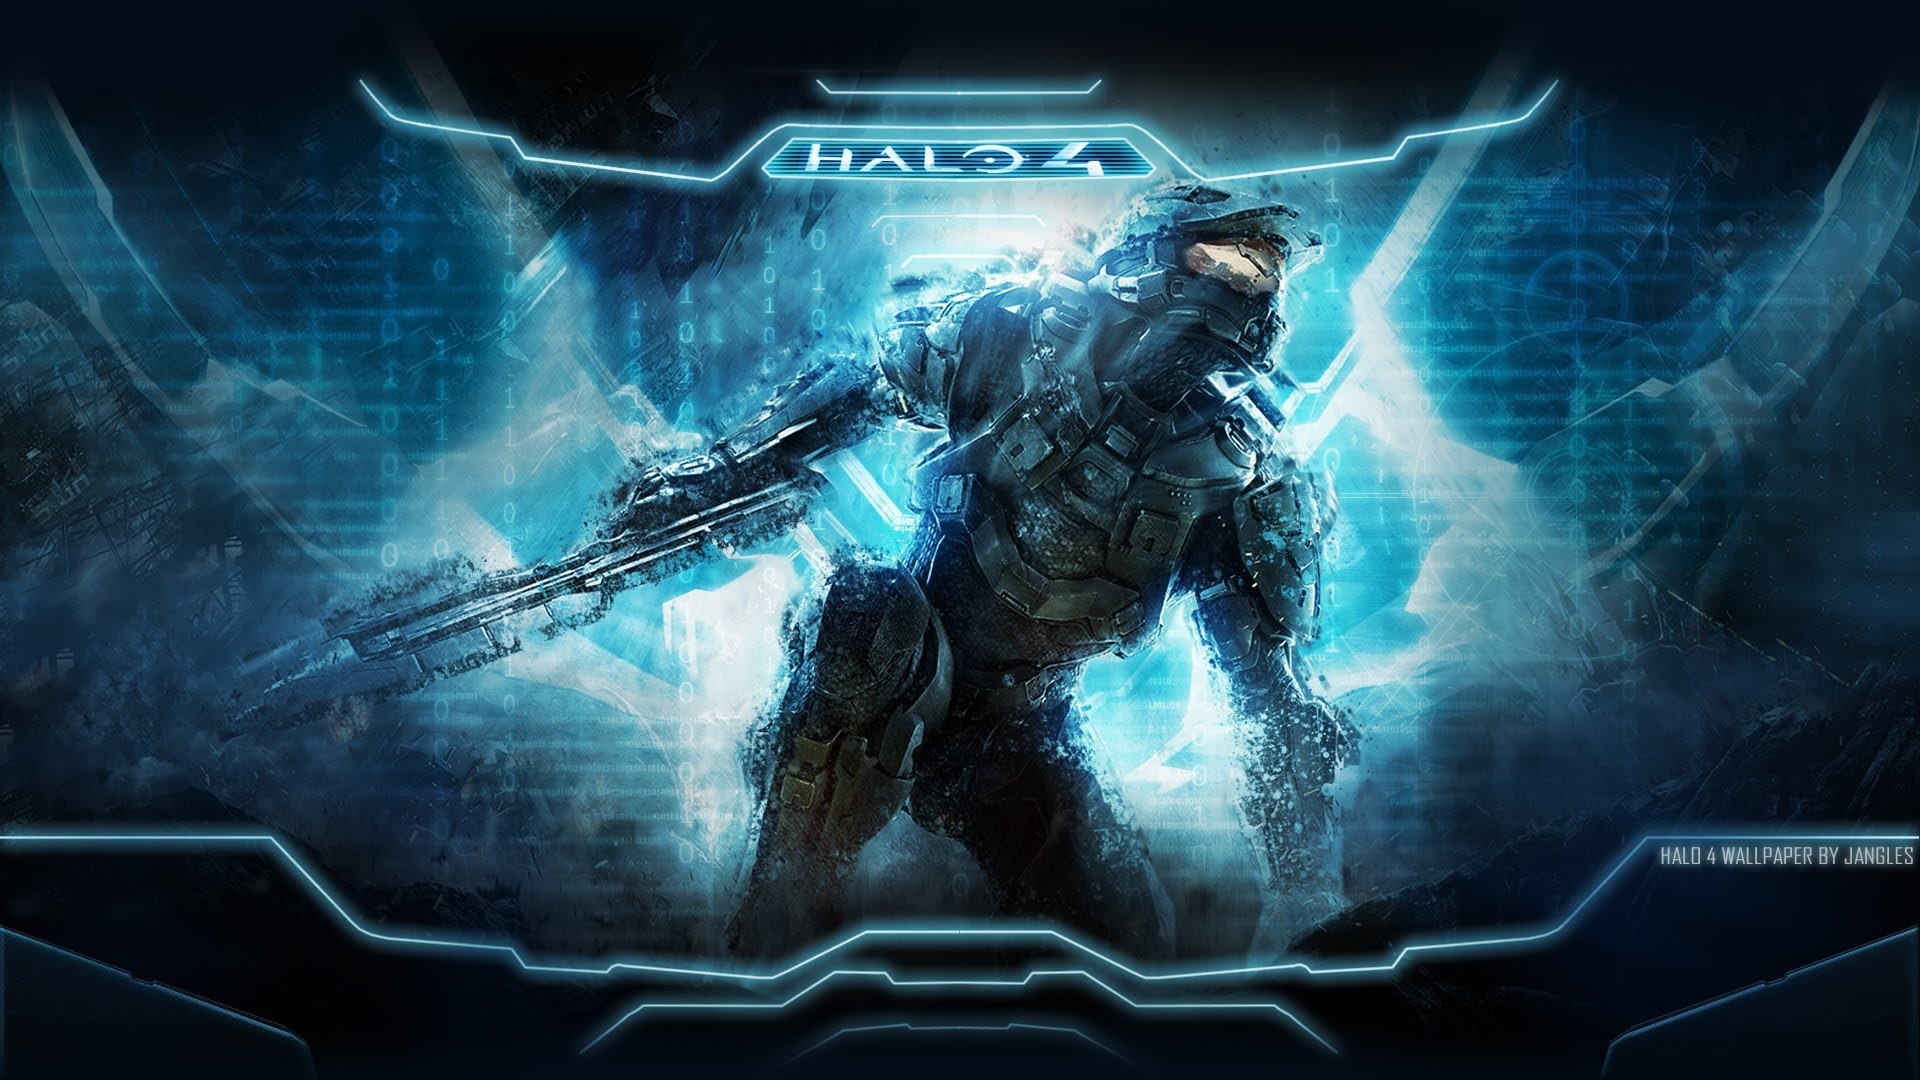 Halo 4 Wallpaper 1080p (75+ images)